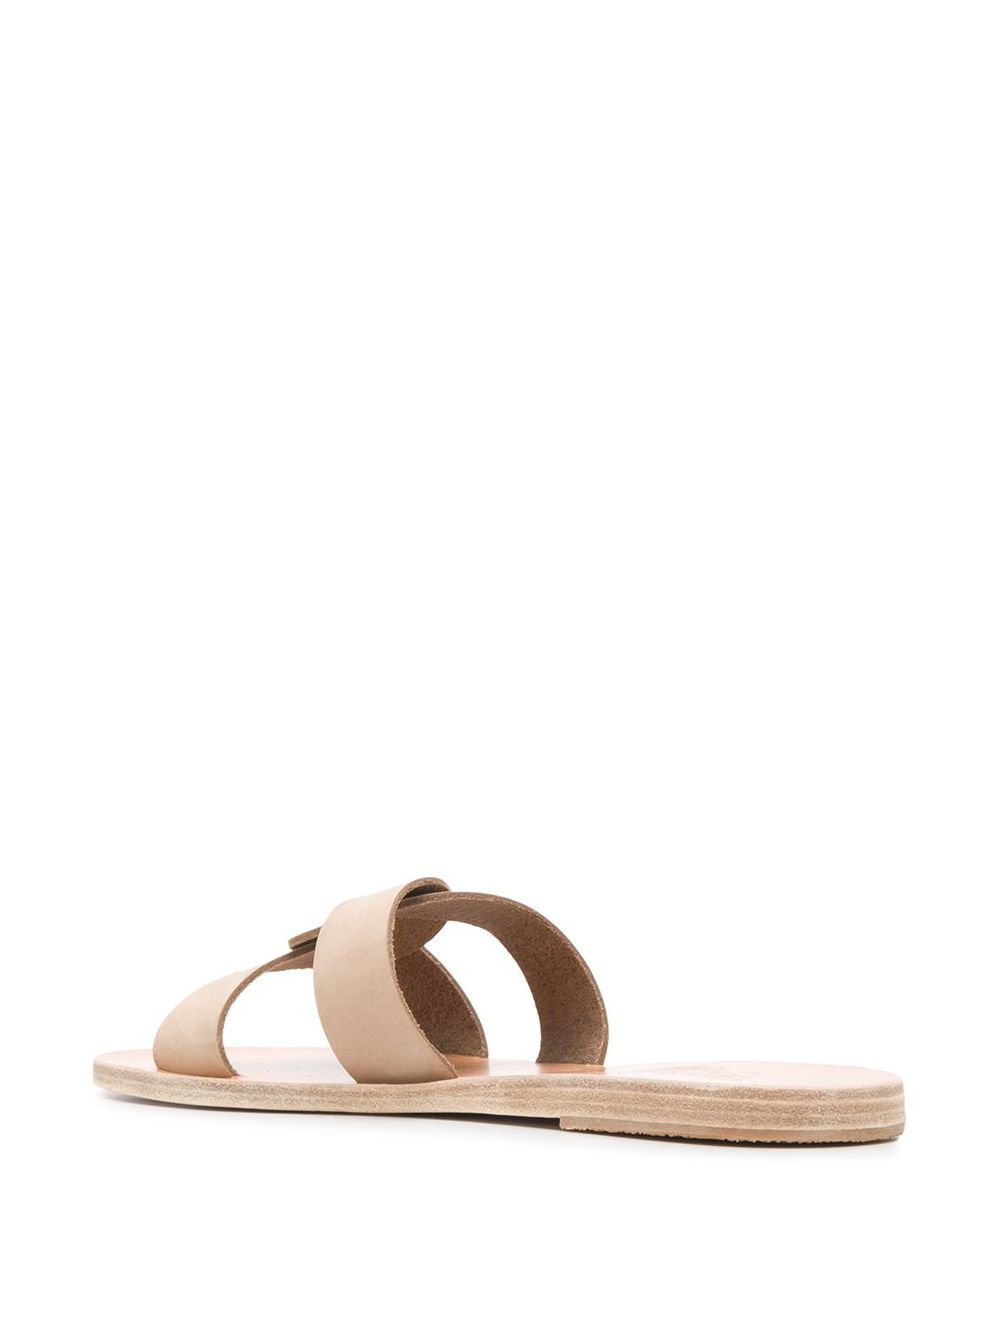 Shop Ancient Greek Sandals Desmos sandals with Express Delivery - Farfetch